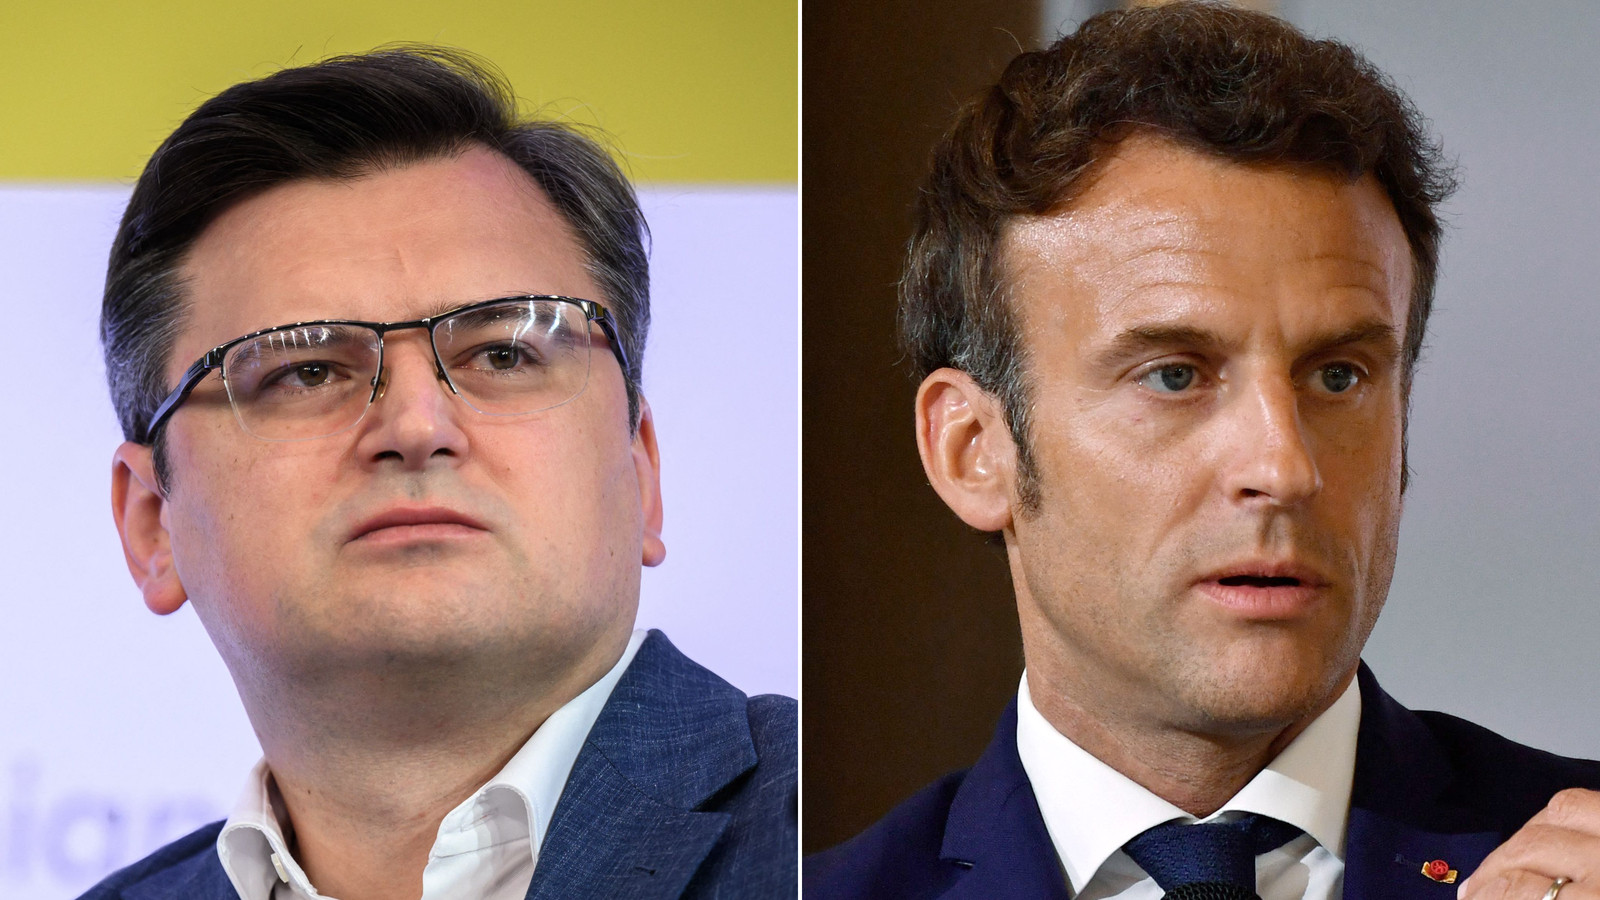 "Calls to avoid humiliation of Russia can only humiliate France" - Ukraine slams French president Macron for saying Russia should not be humiliated